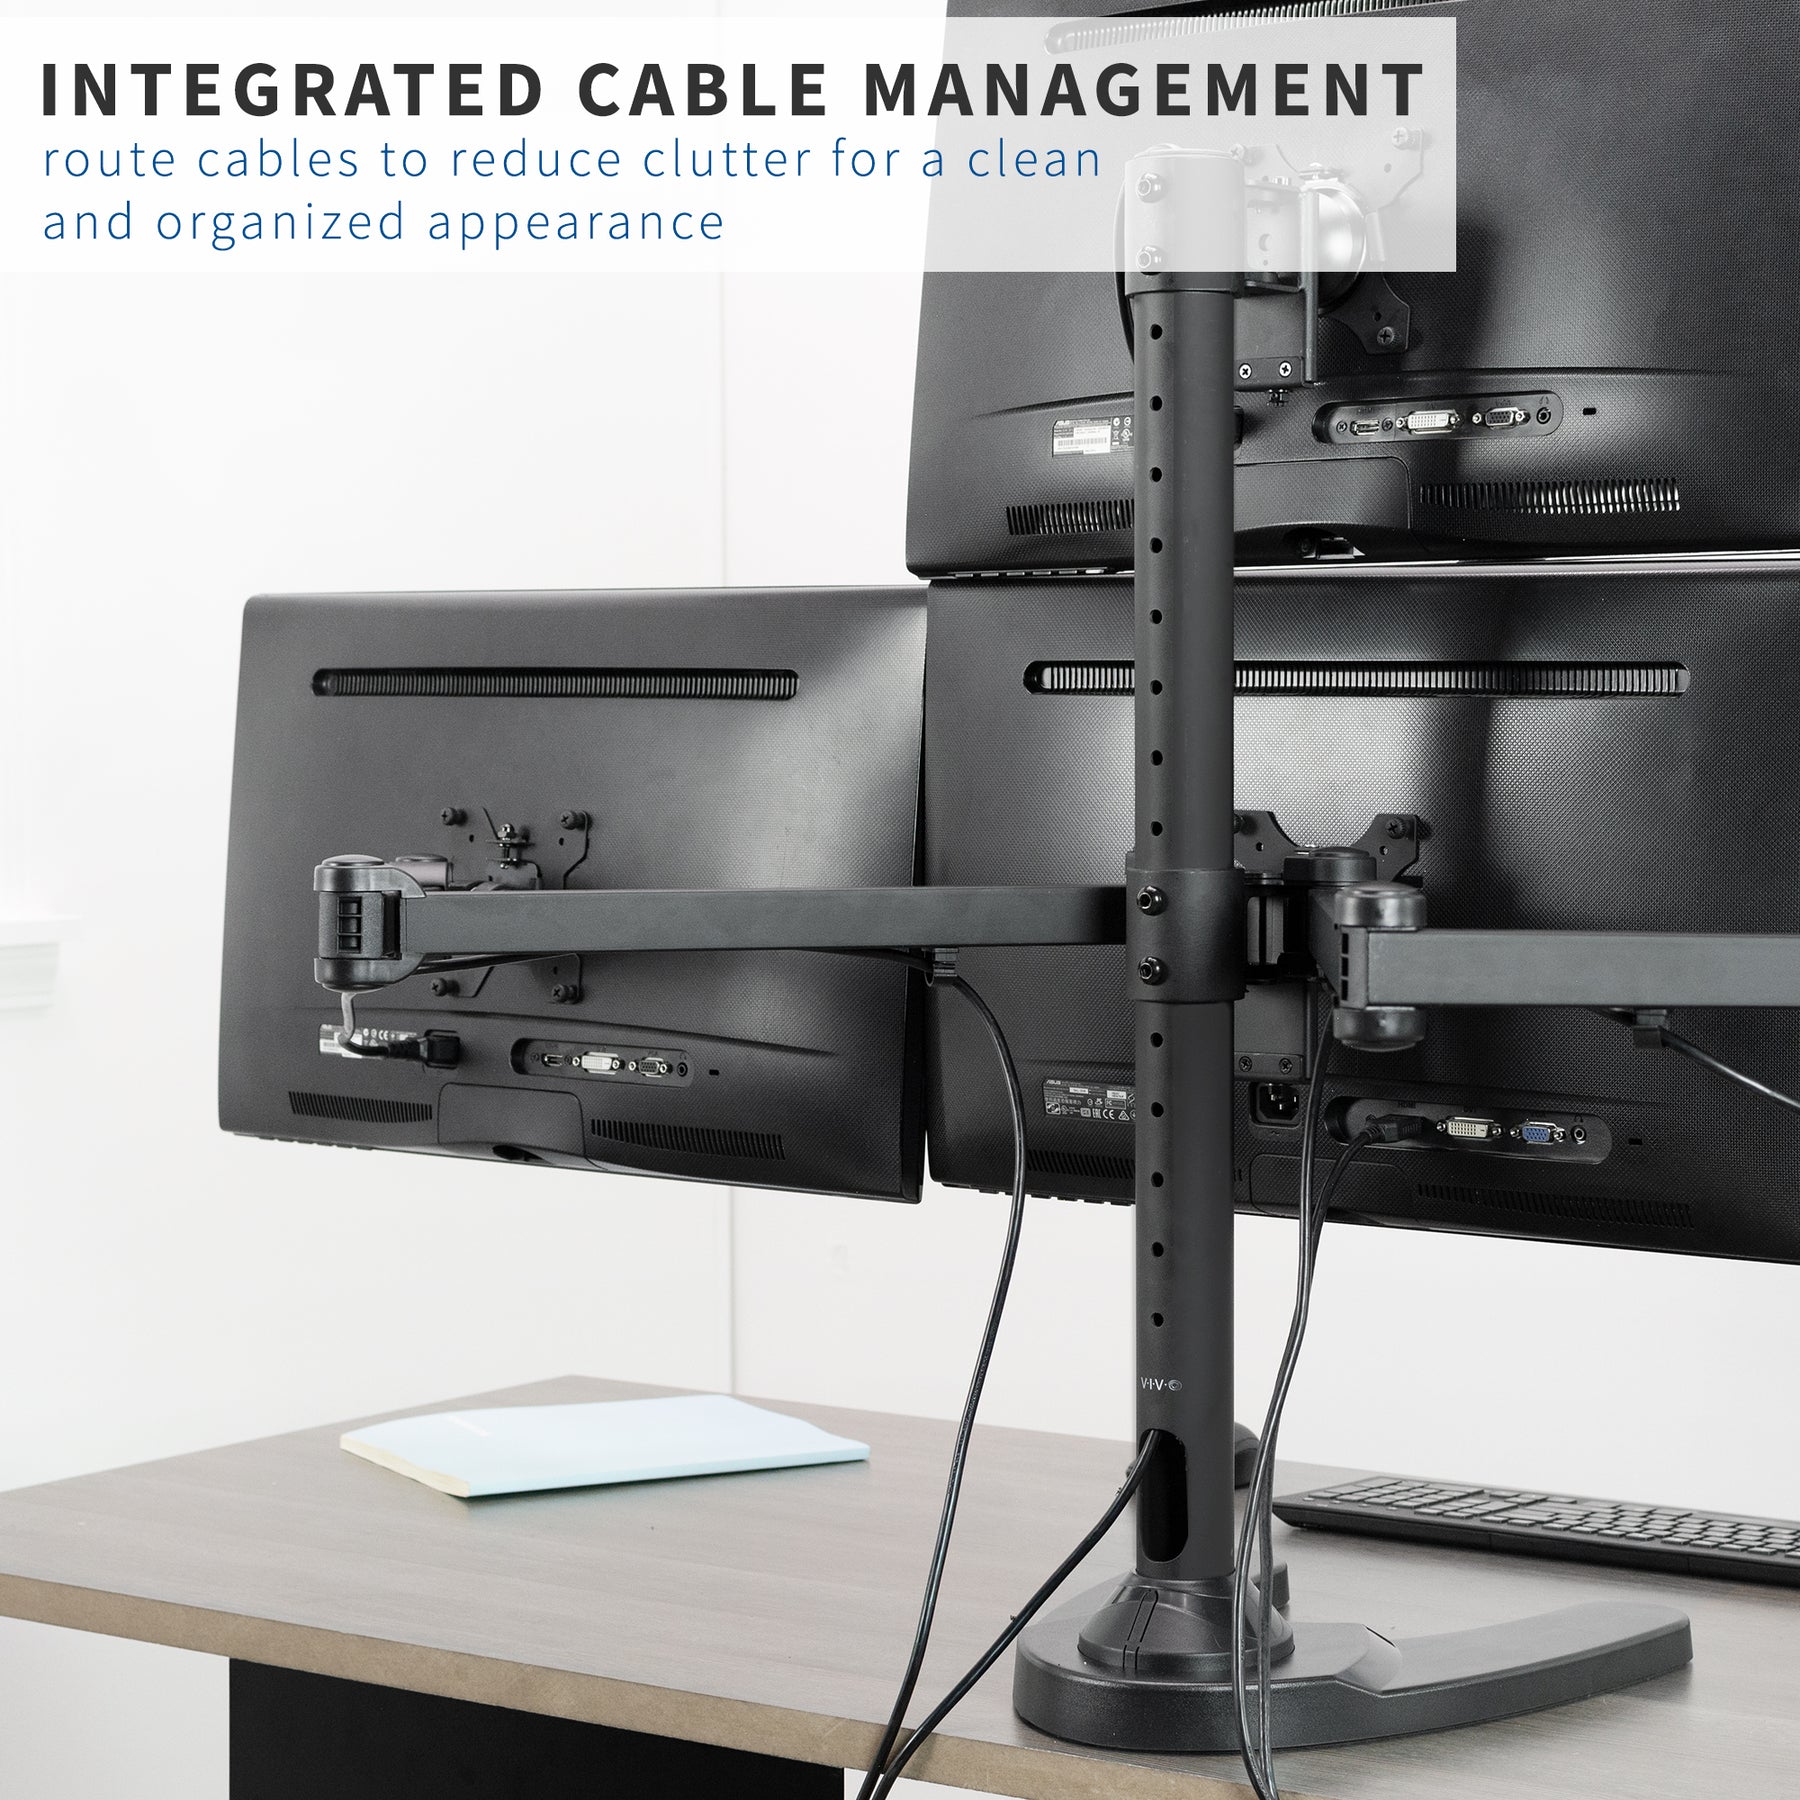 Quad Monitor Desk Stand – VIVO desk solutions, screen mounting, and more